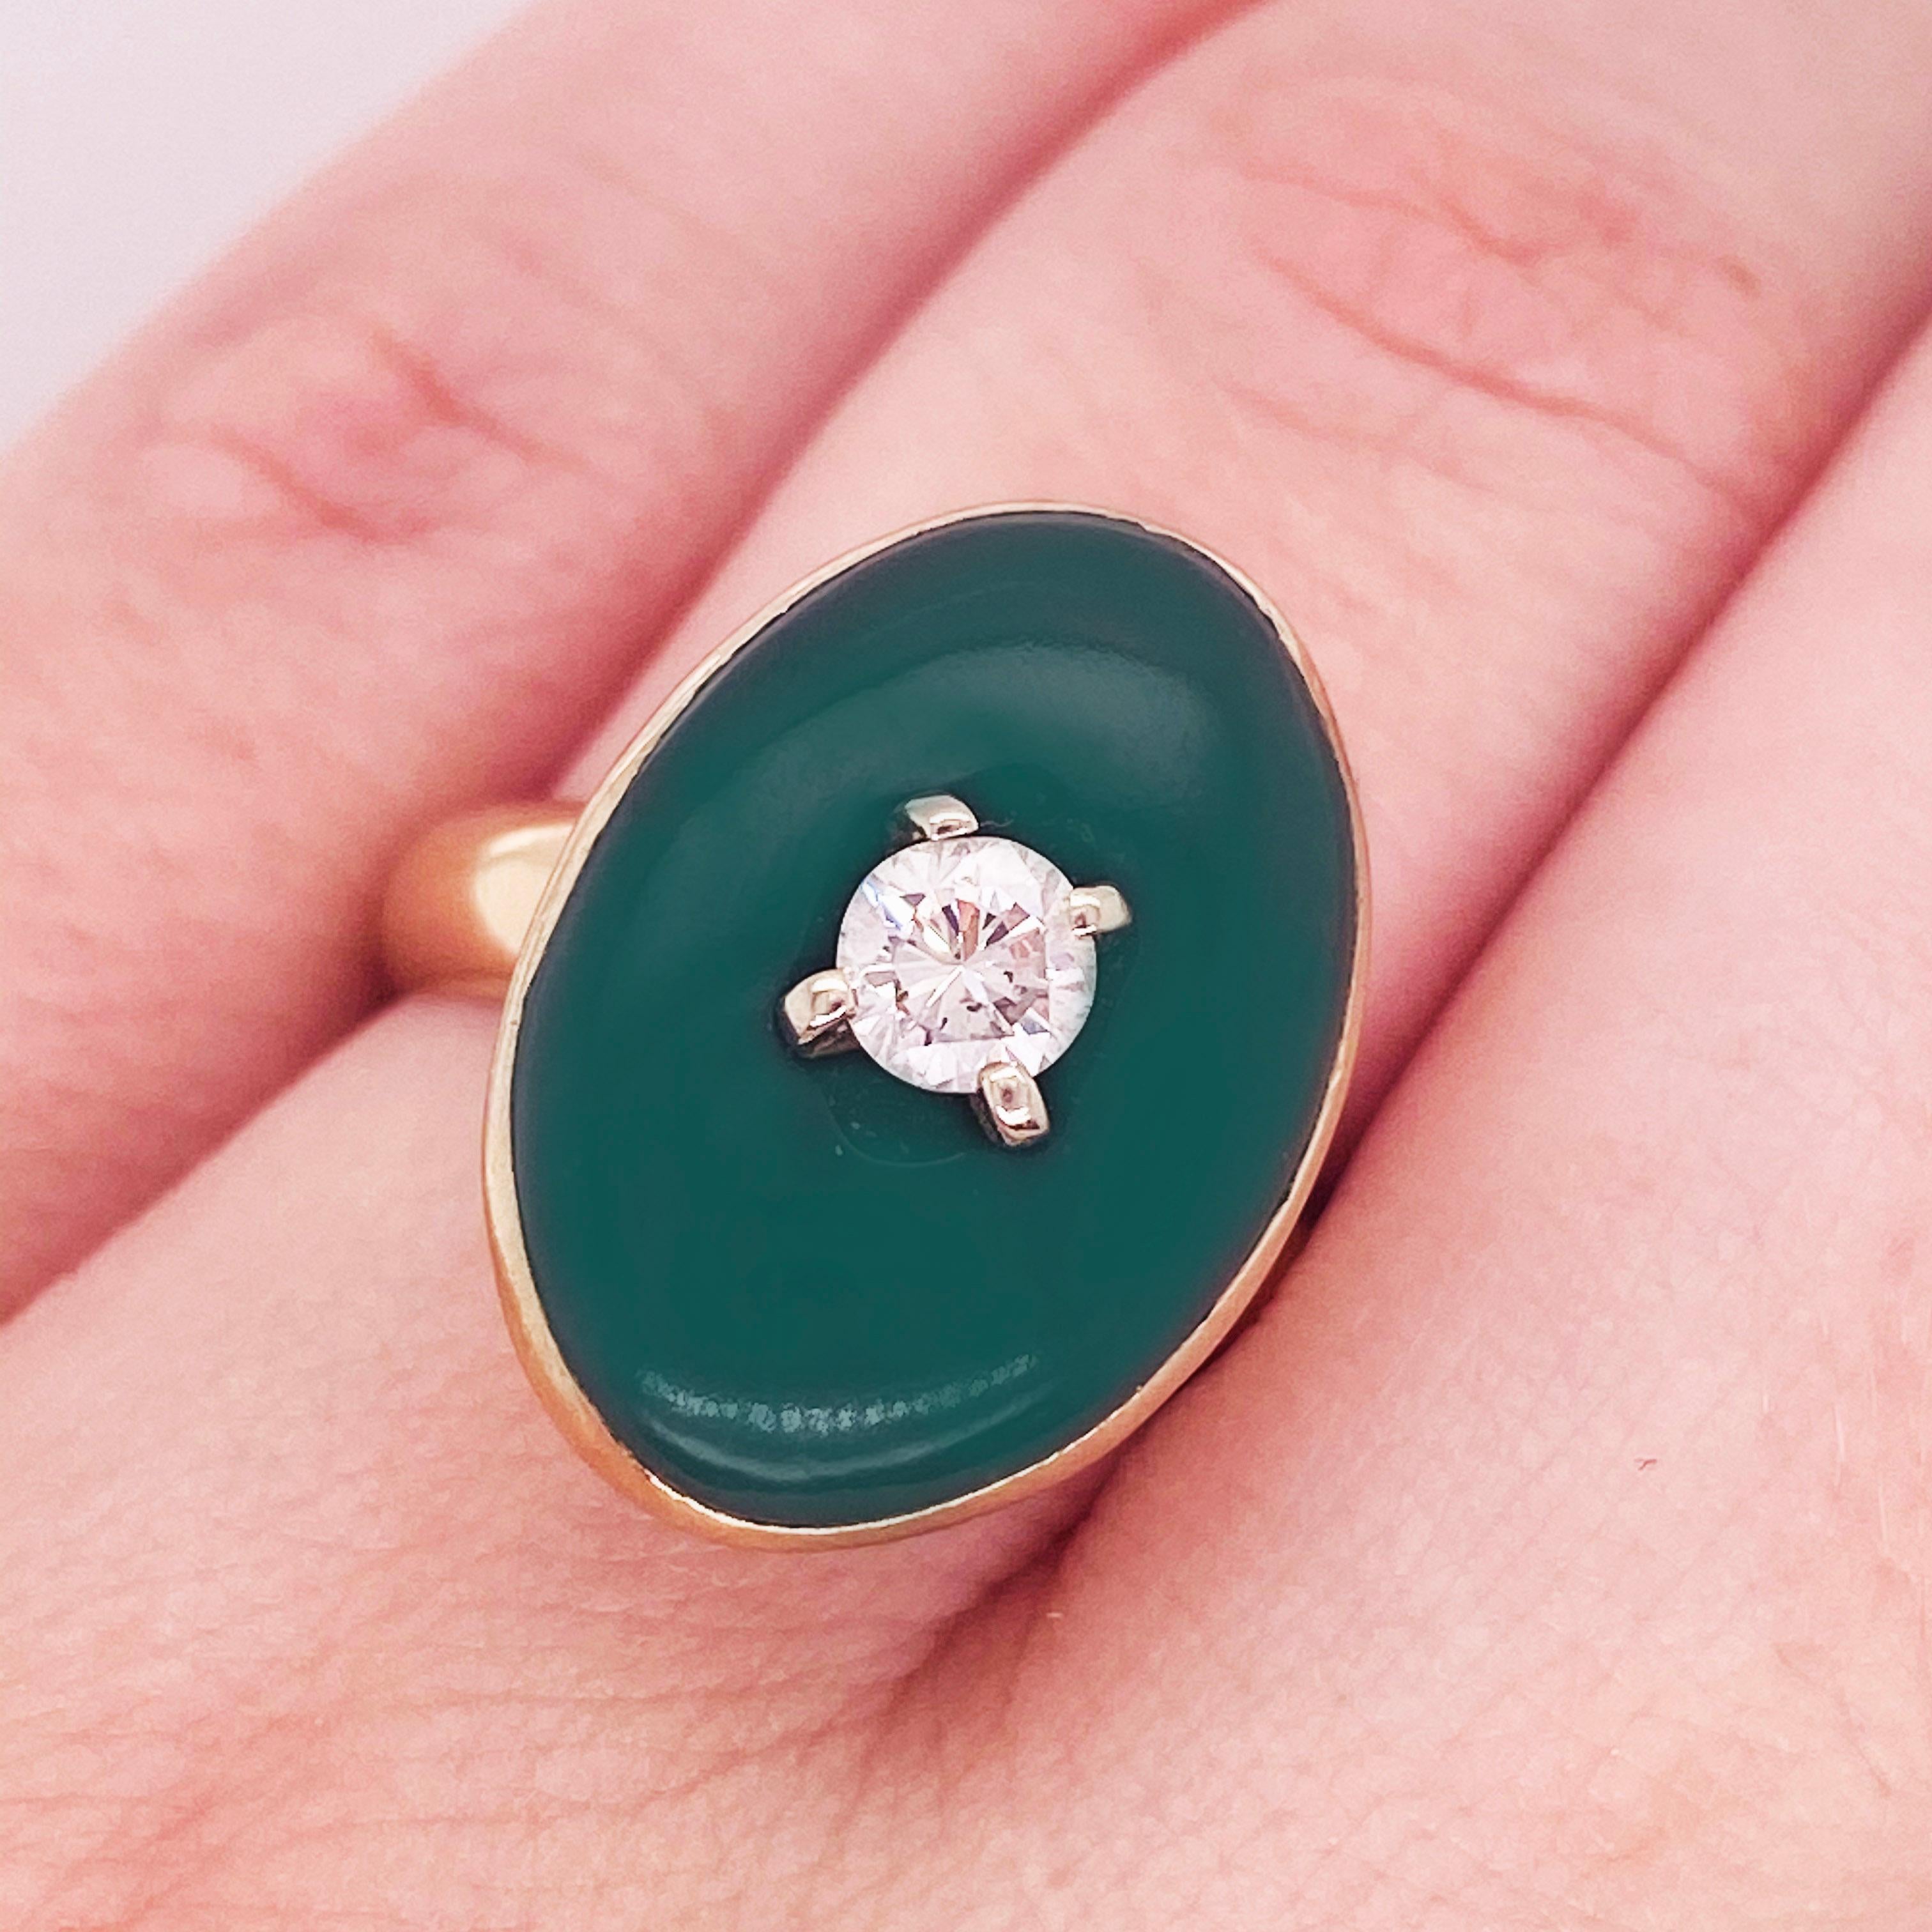 Circa 1975. What makes this Jade ring so amazing is the oval and bezel set. Drilled into the center of the jade is a lovely sized diamond! The details for this ring are listed below:
Metal Quality: 14K Yellow Gold
Gemstone: Jade
White Diamond- .25